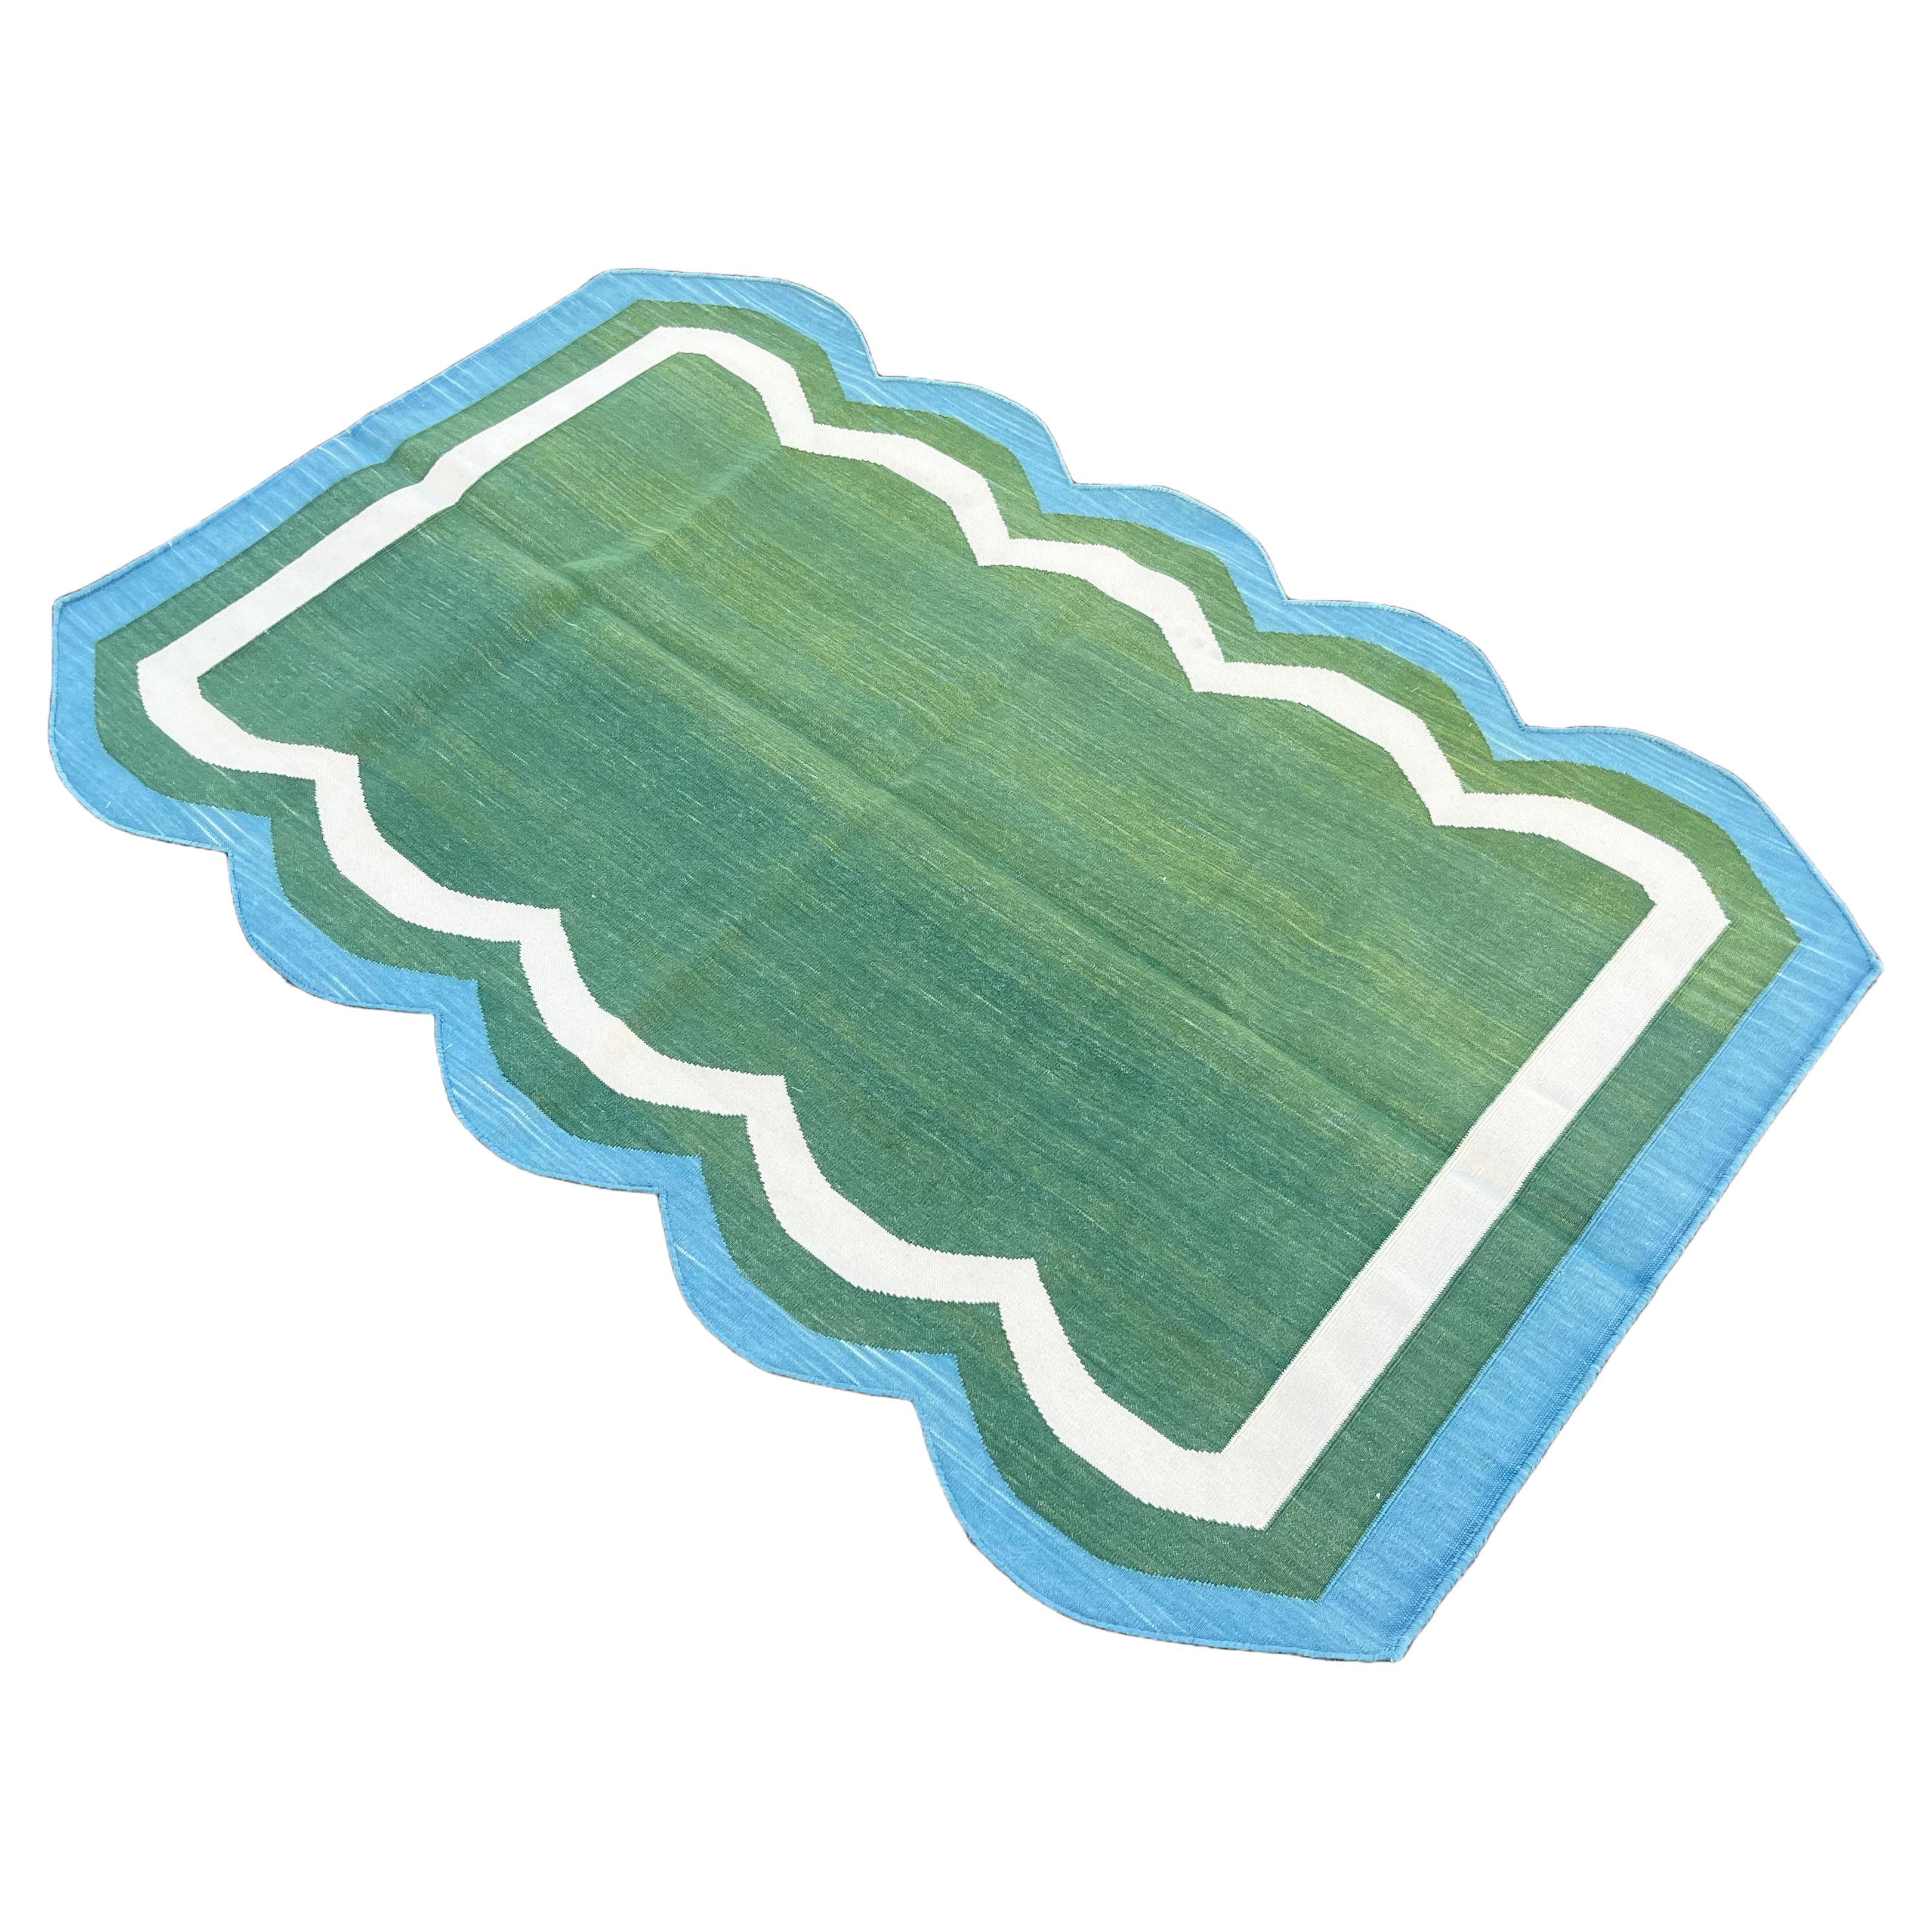 Handmade Cotton Area Flat Weave Rug, 3x5 Green And Blue Scalloped Kilim Dhurrie For Sale